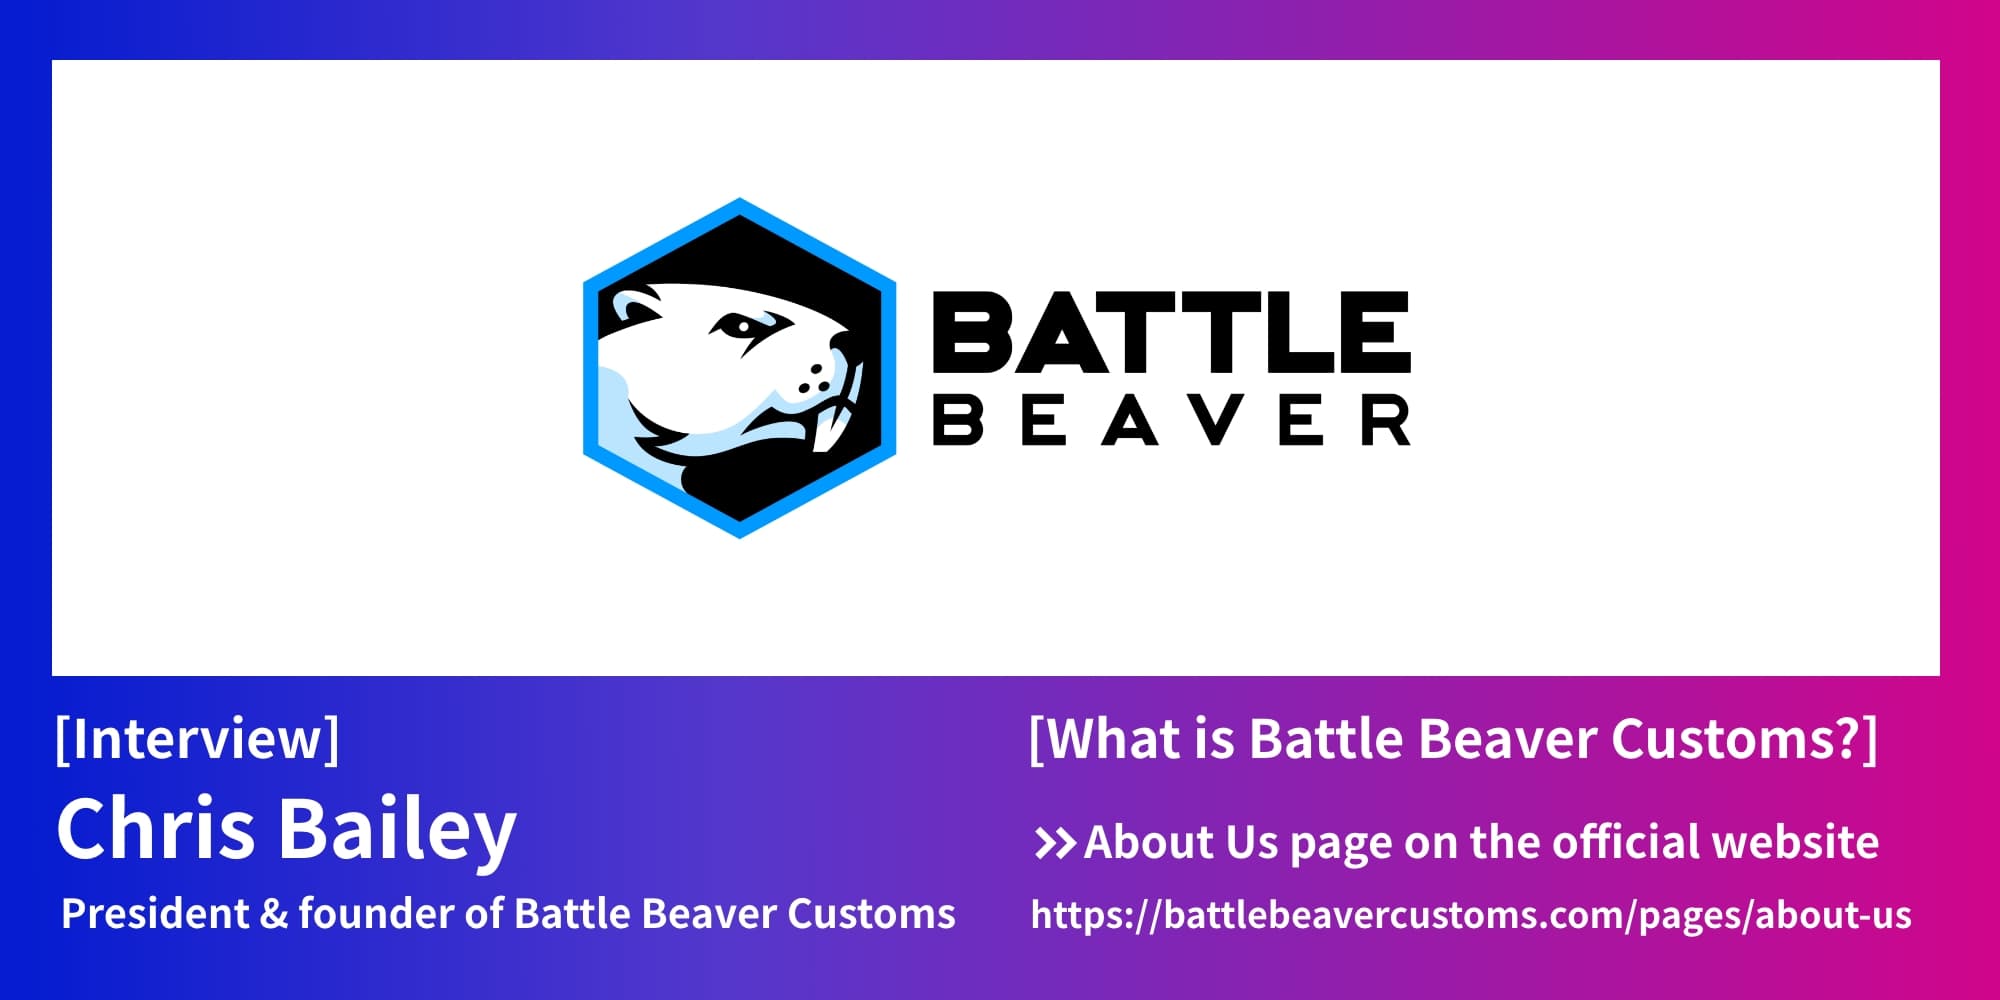 [Interview] Chris Bailey:President & founder of Battle Beaver Customs BATTLE BEAVER [What is Battle Beaver Customs?] →About Us page on the official website https://battlebeavercustoms.com/pages/about-us